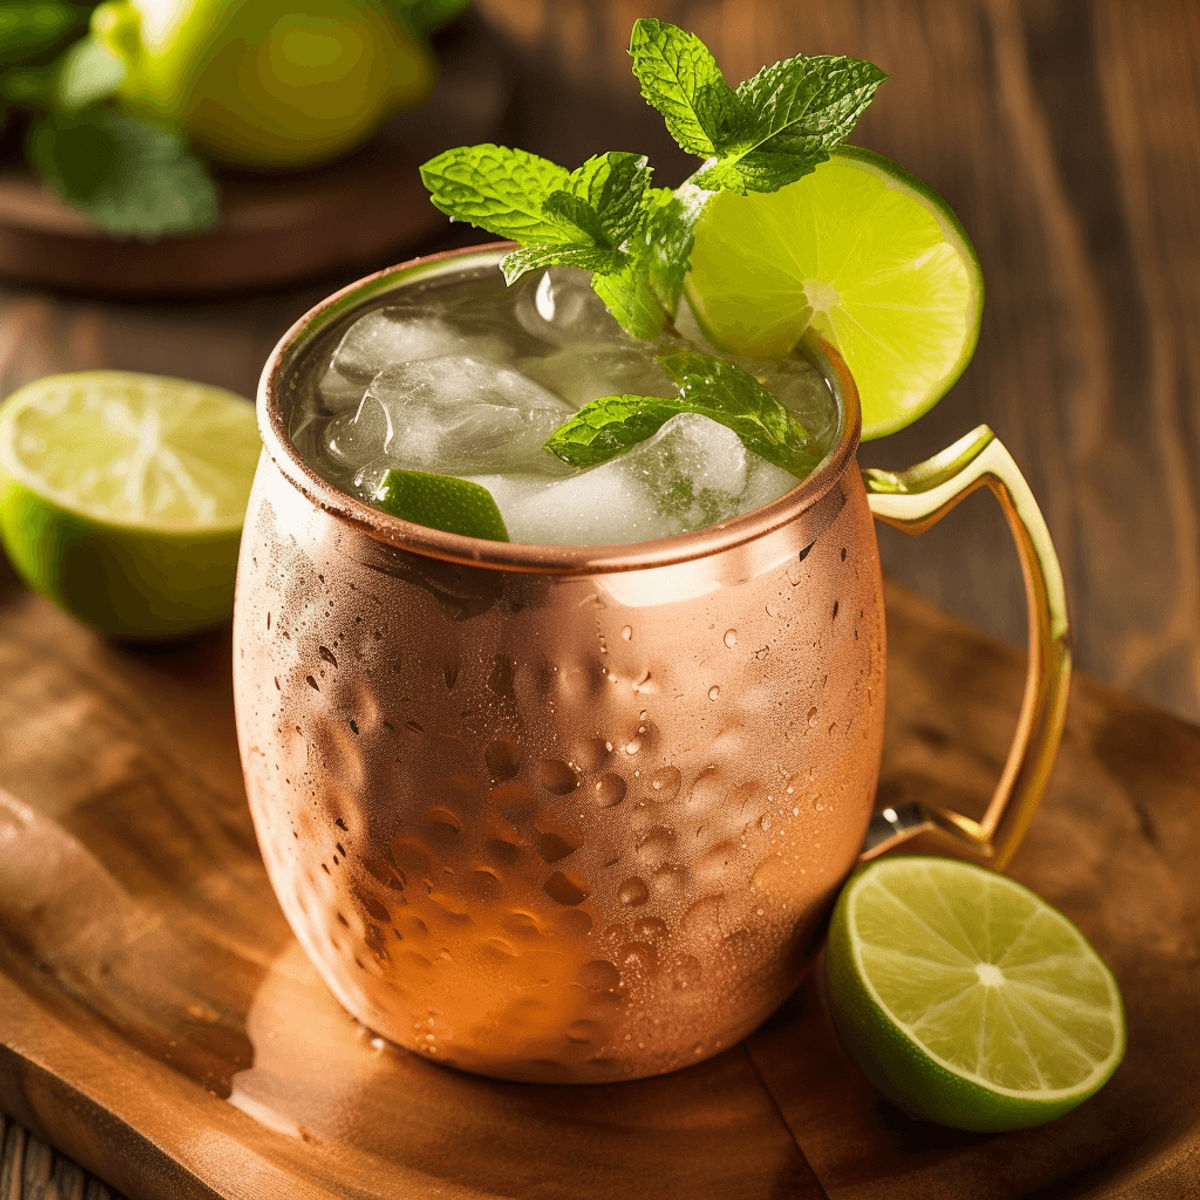 Best Moscow Mule Recipe: How to Make the Vodka, Ginger & Lime